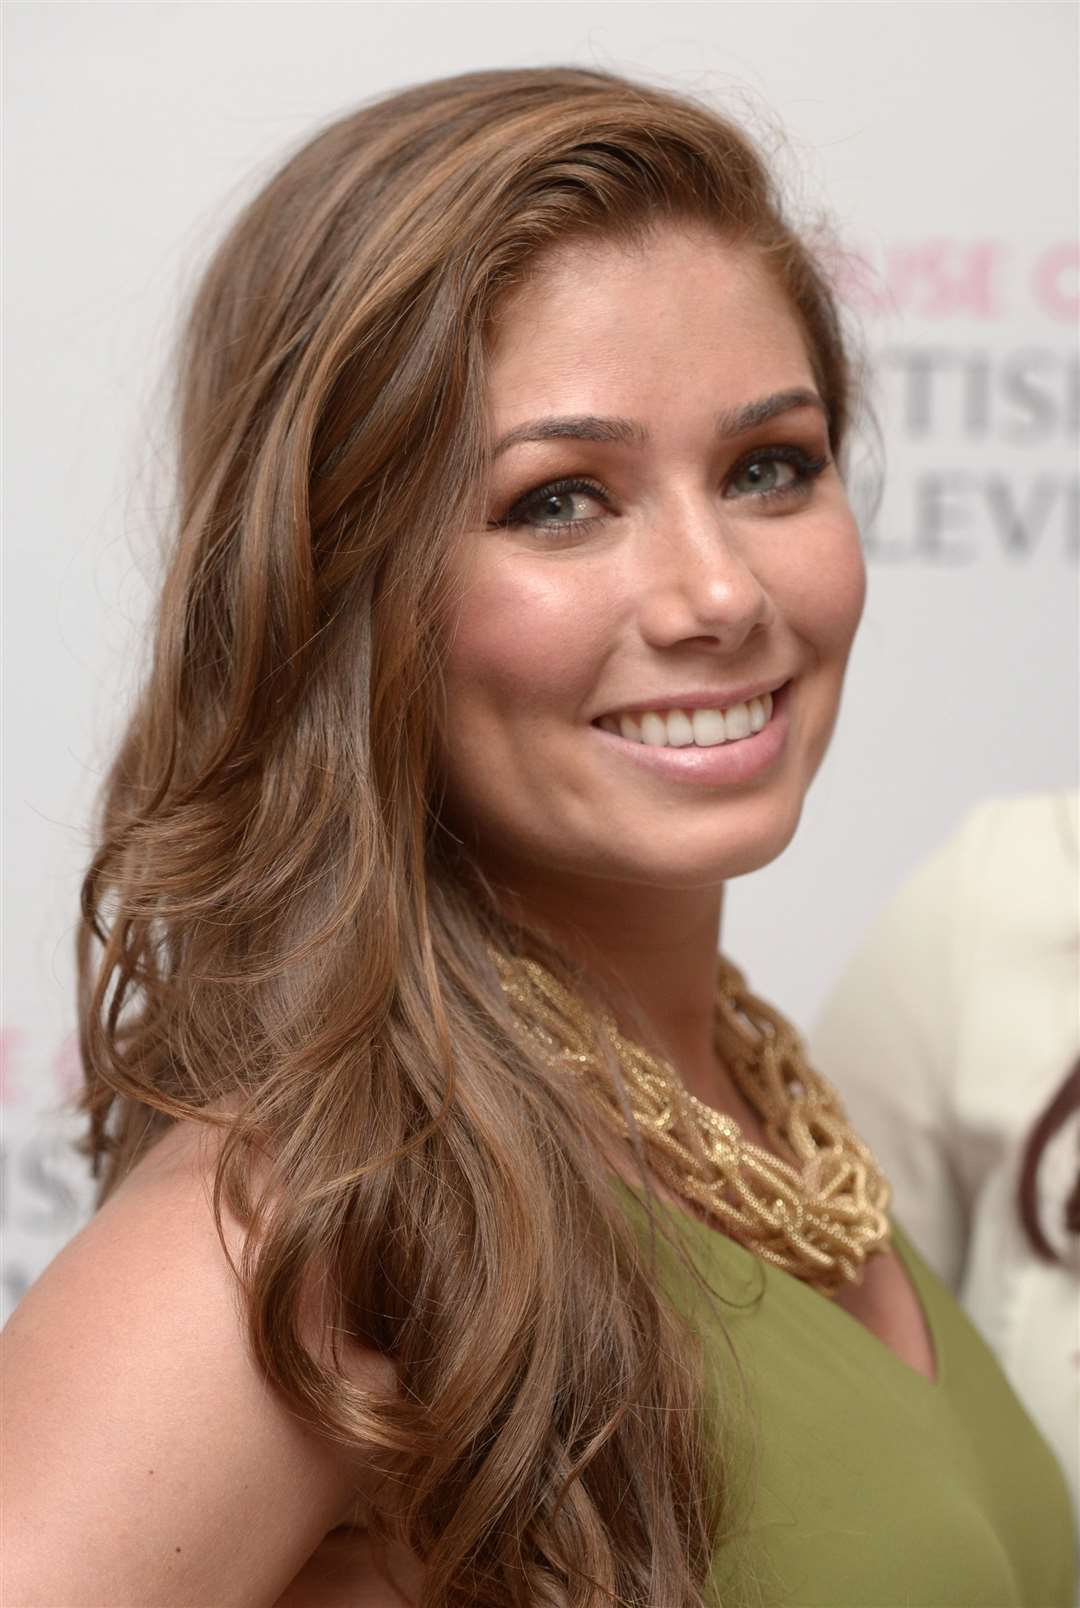 Nikki Sanderson’s legal team said in court documents that she experienced ‘unusual telephone and media-related activity’ (PA)